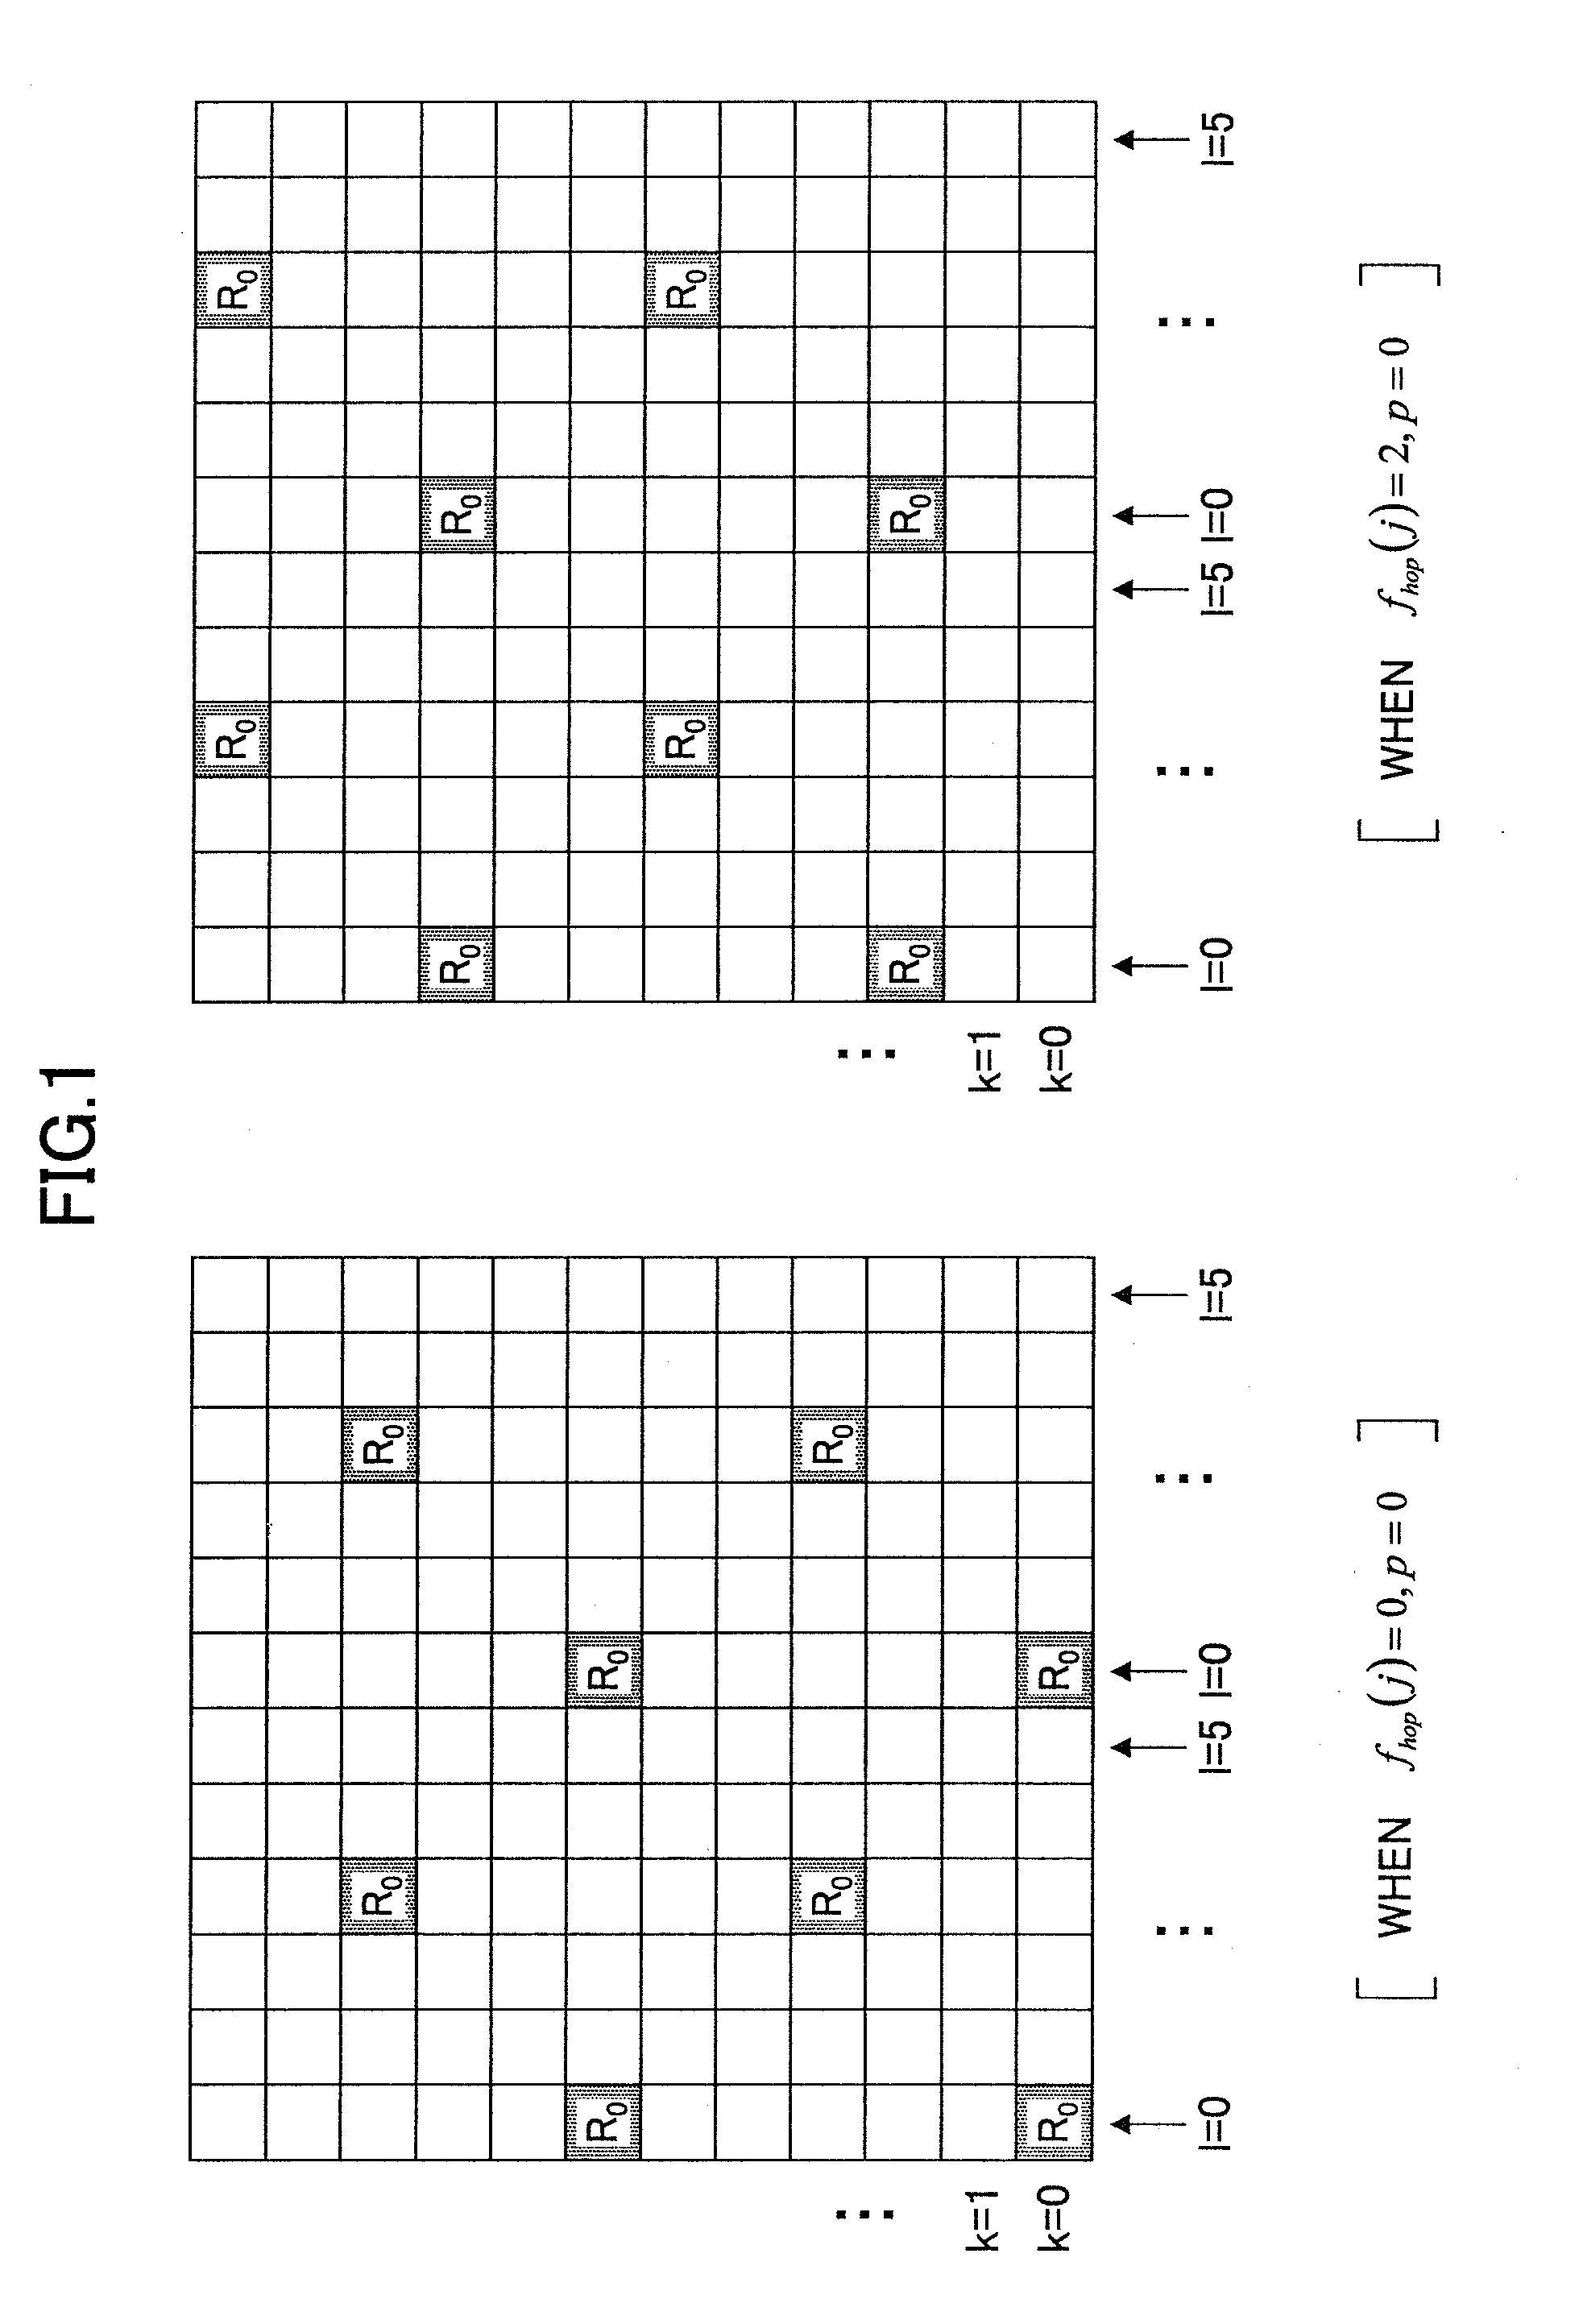 Base station apparatus, user apparatus and method used in mobile communication system